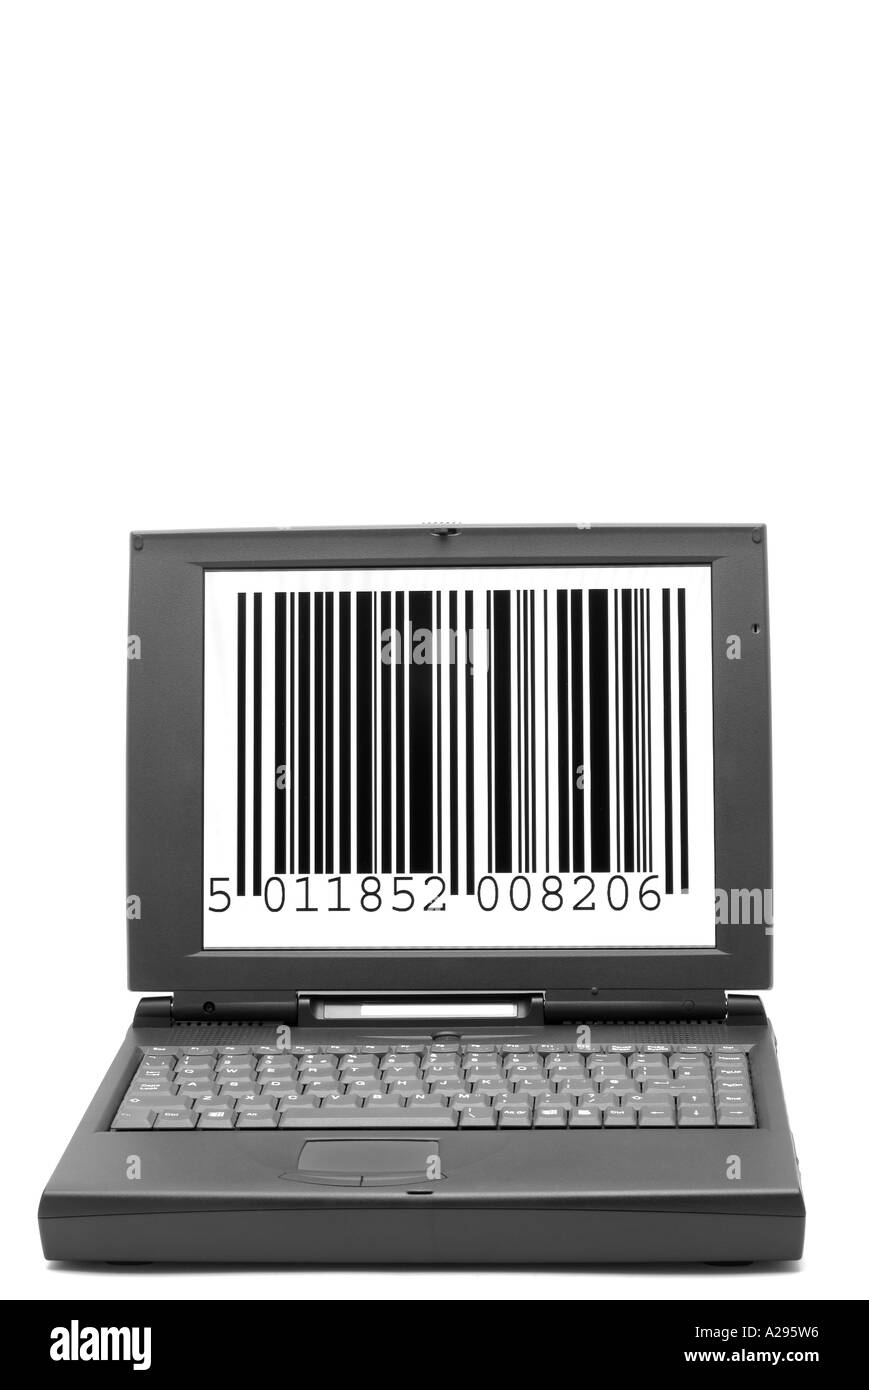 Laptop Computer with a Barcode Displayed on the Monitor Stock Photo